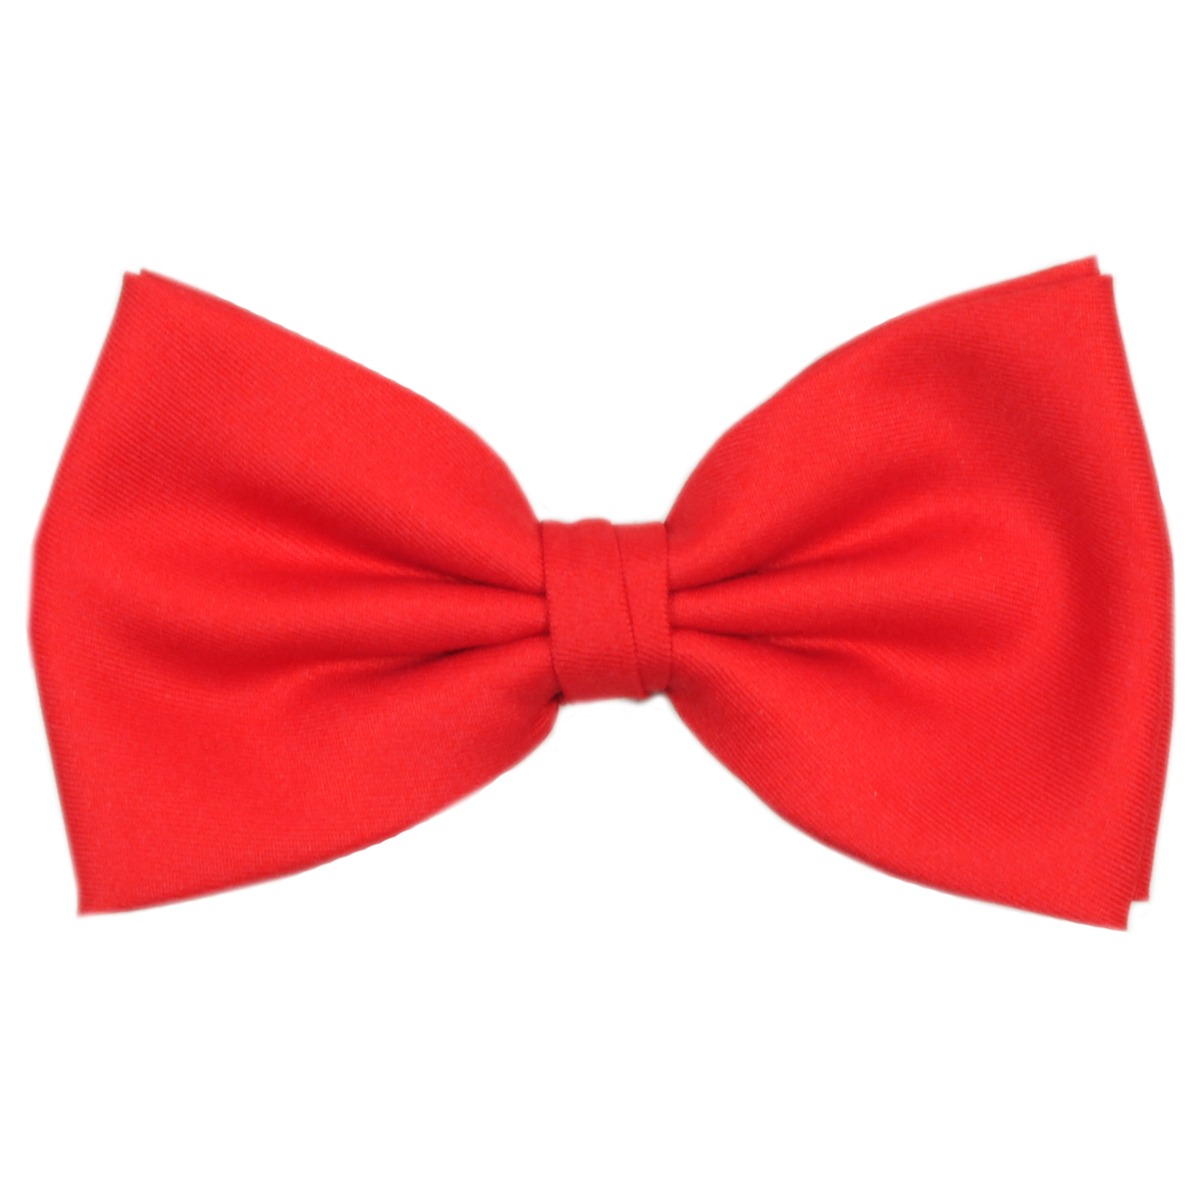 Be The First To Review  Red Bow Tie  Click Here To Cancel Reply